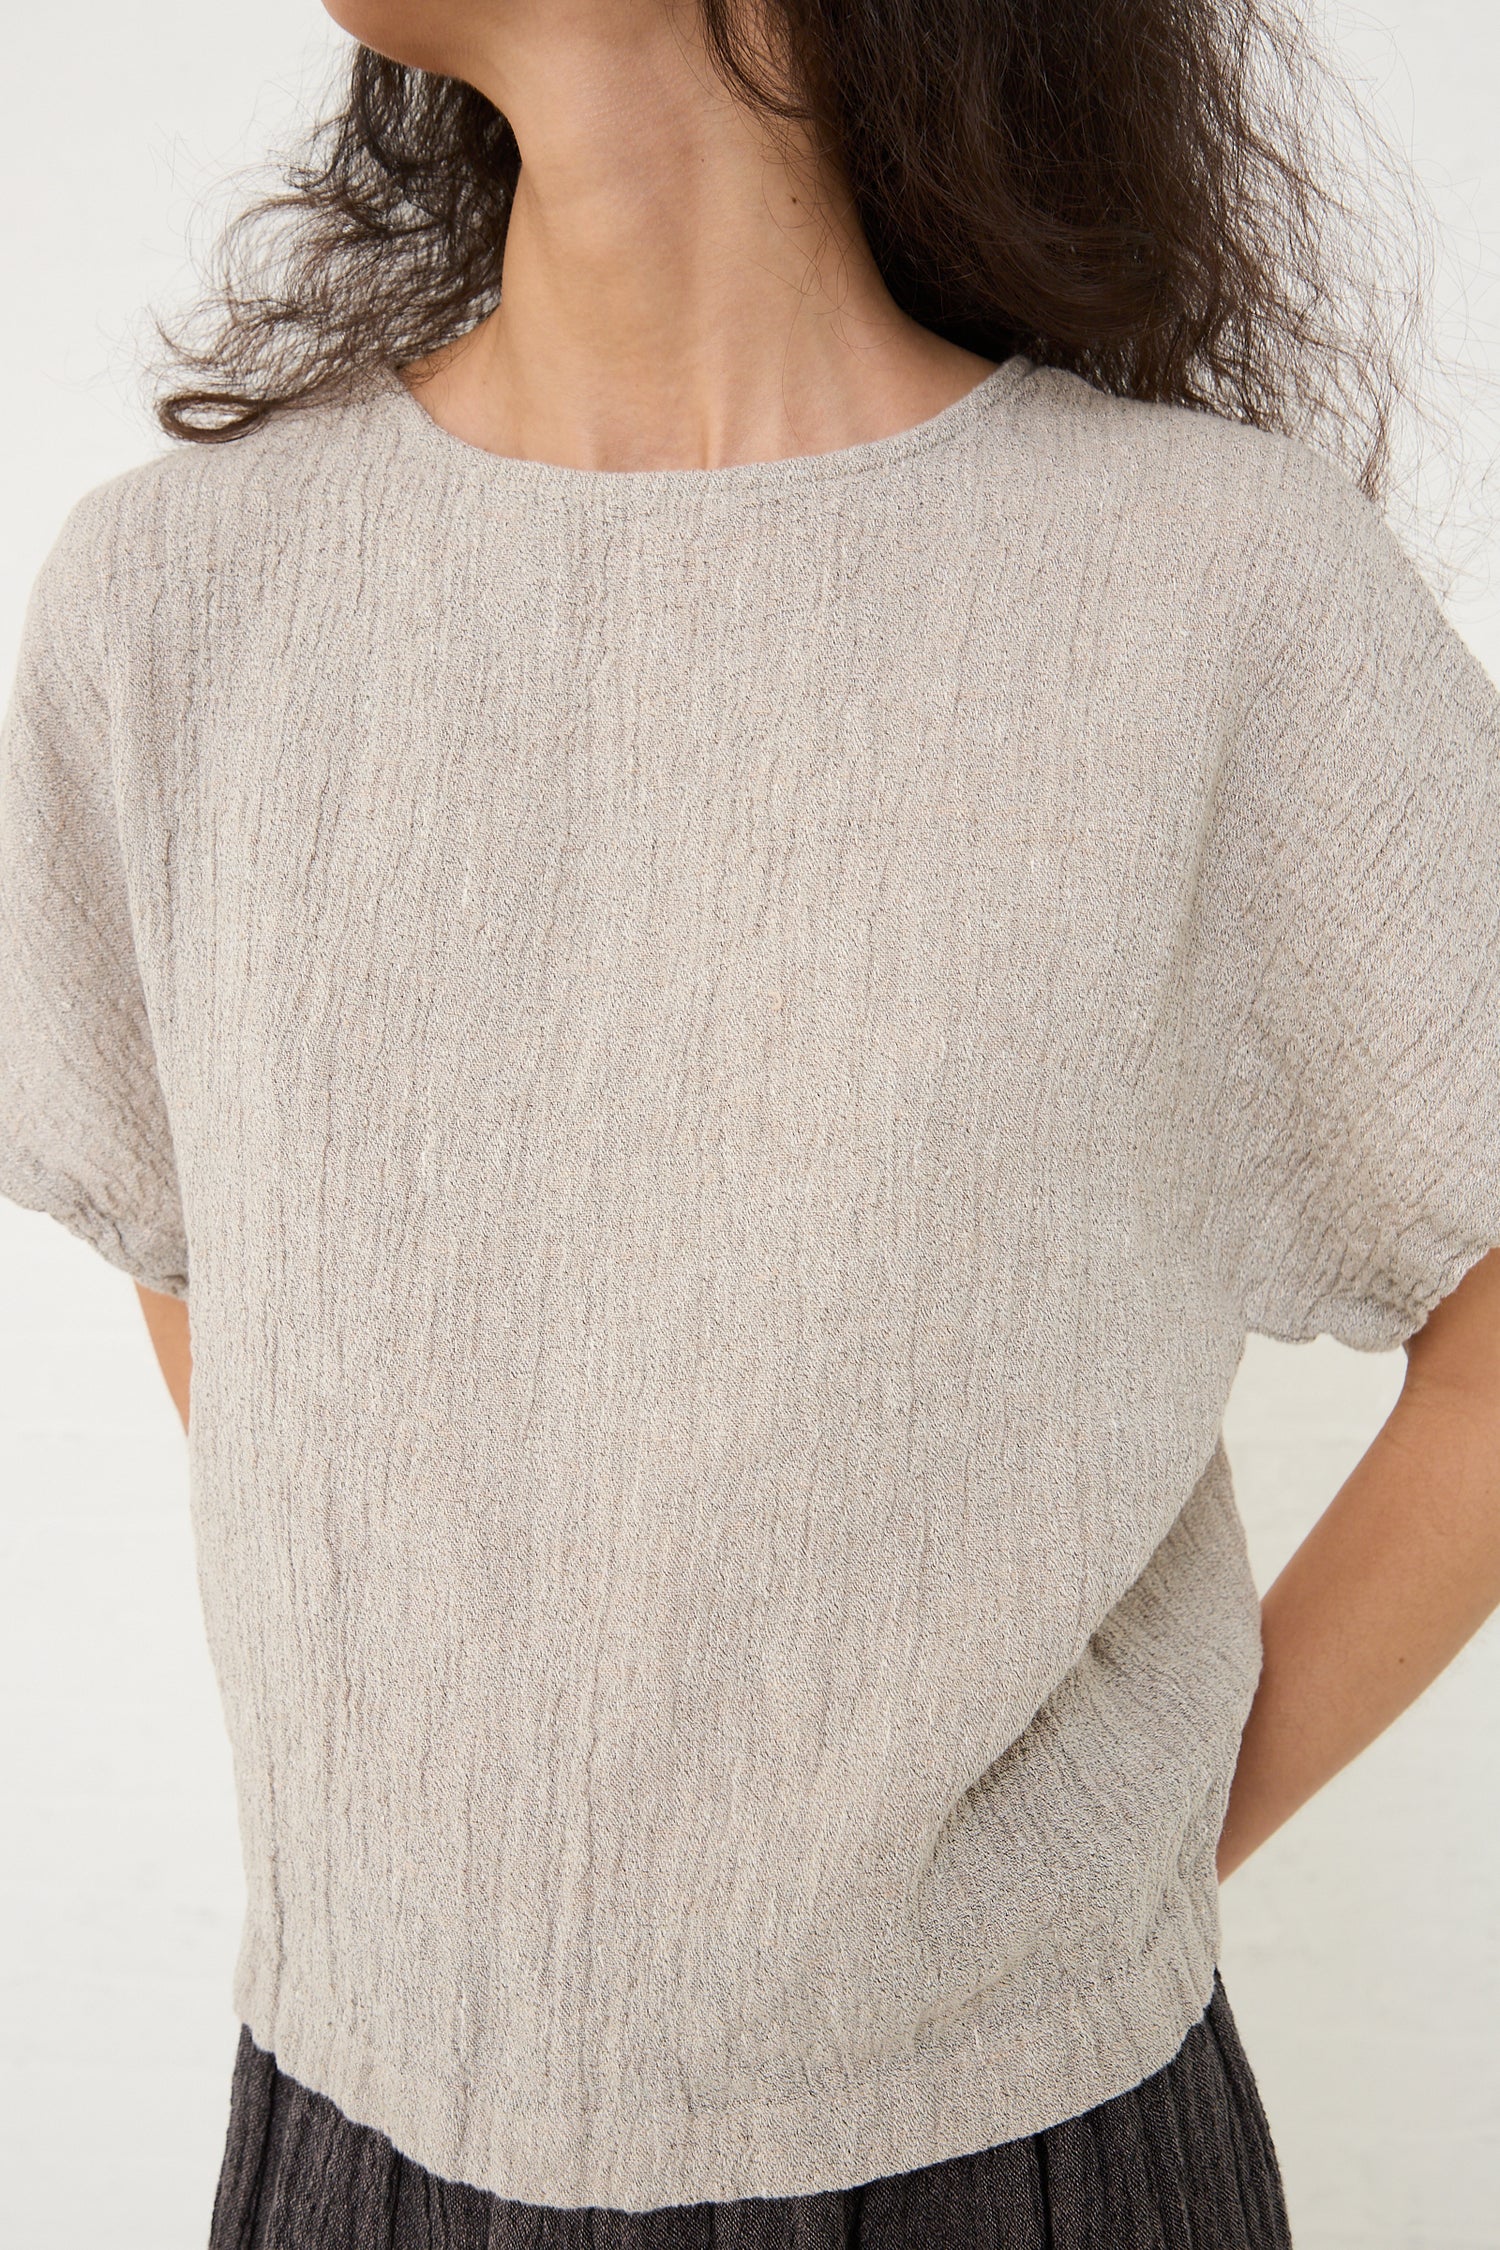 Woman wearing a textured beige Black Crane Linen Basic Crew Top in Ash, made in Los Angeles.